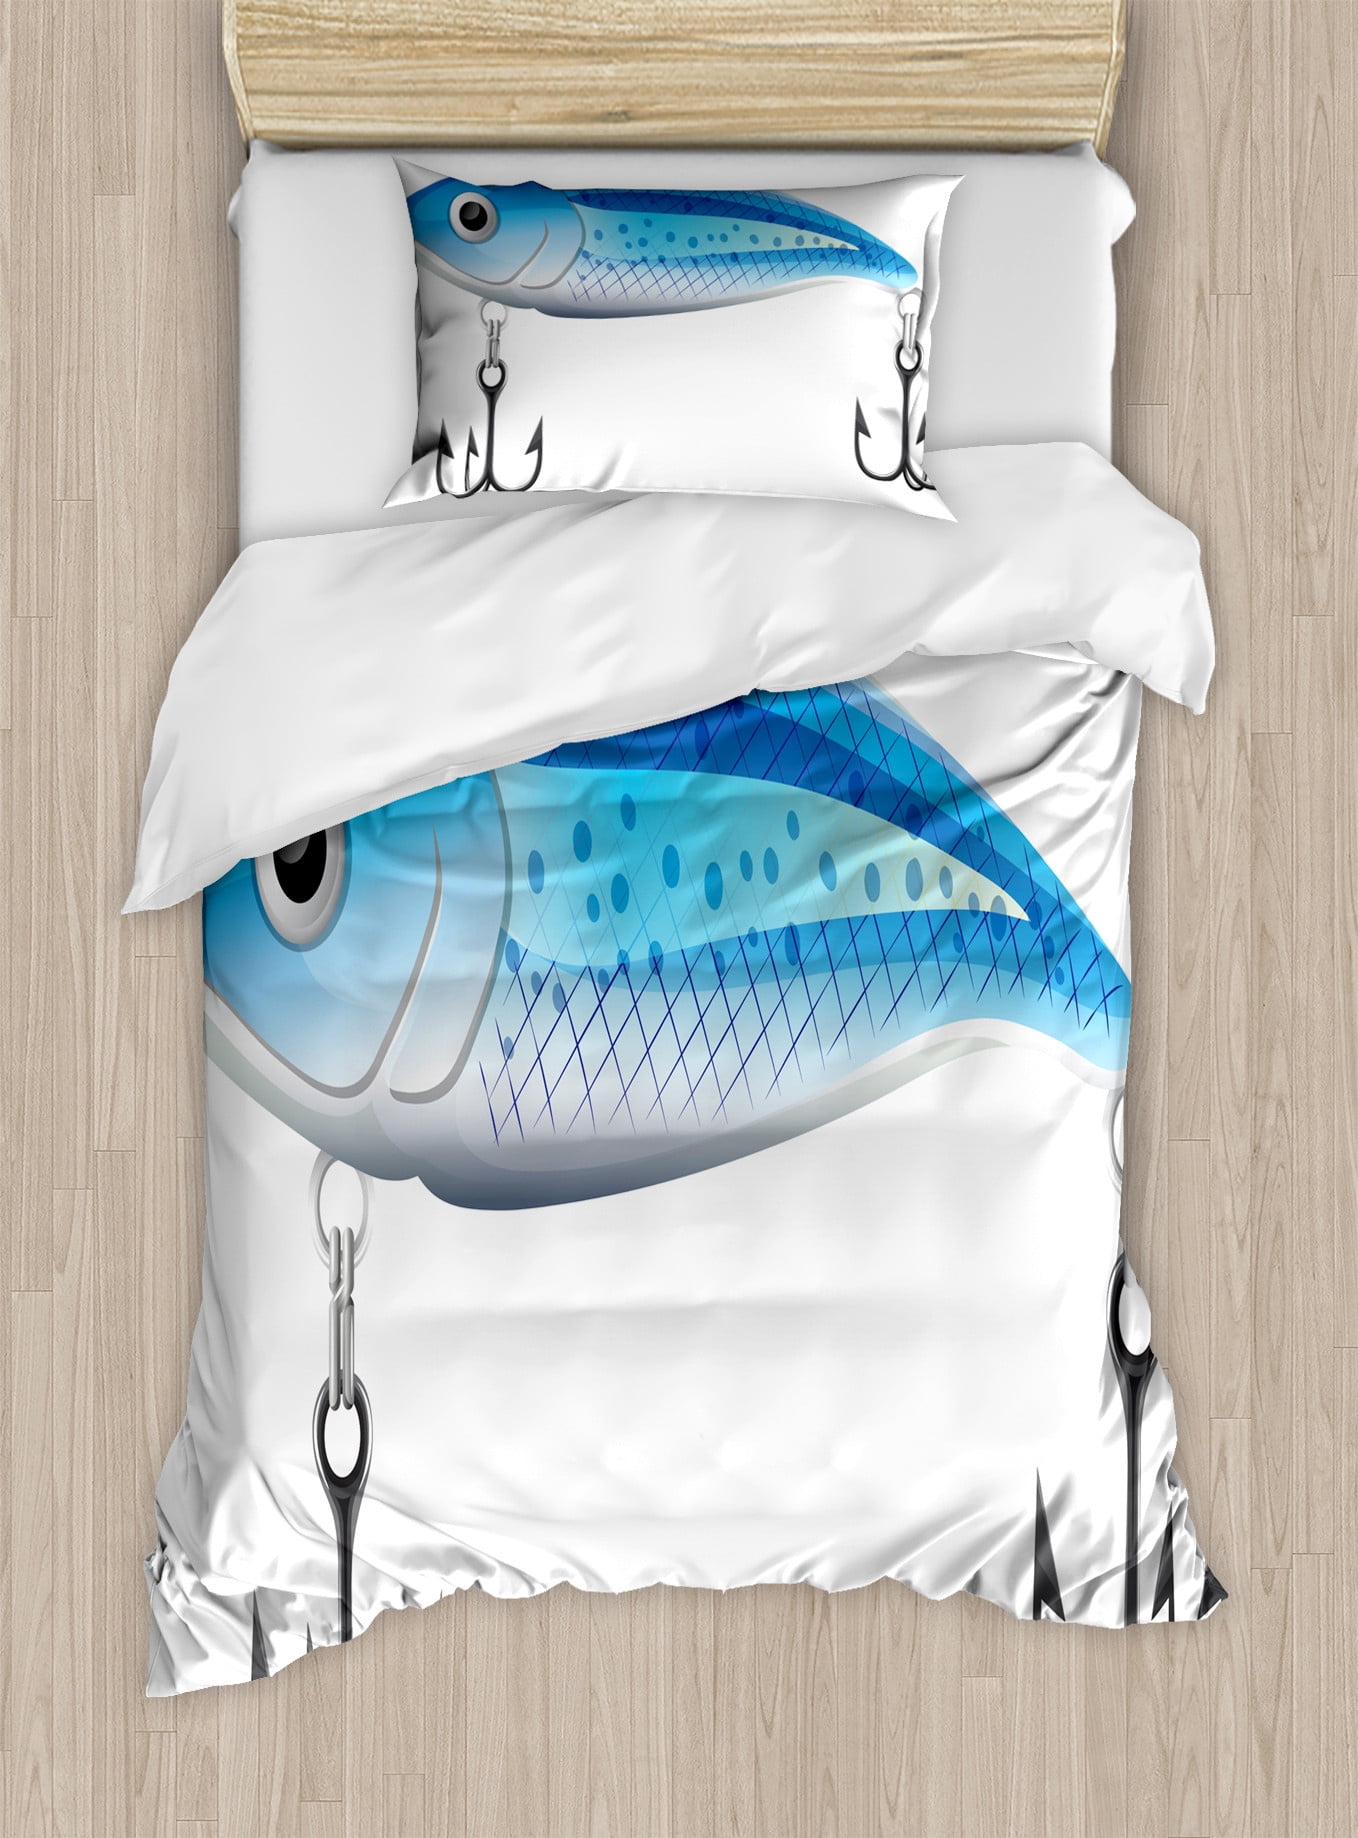 Fishing Theme Duvet Cover Set, Angling Elements with Artificial